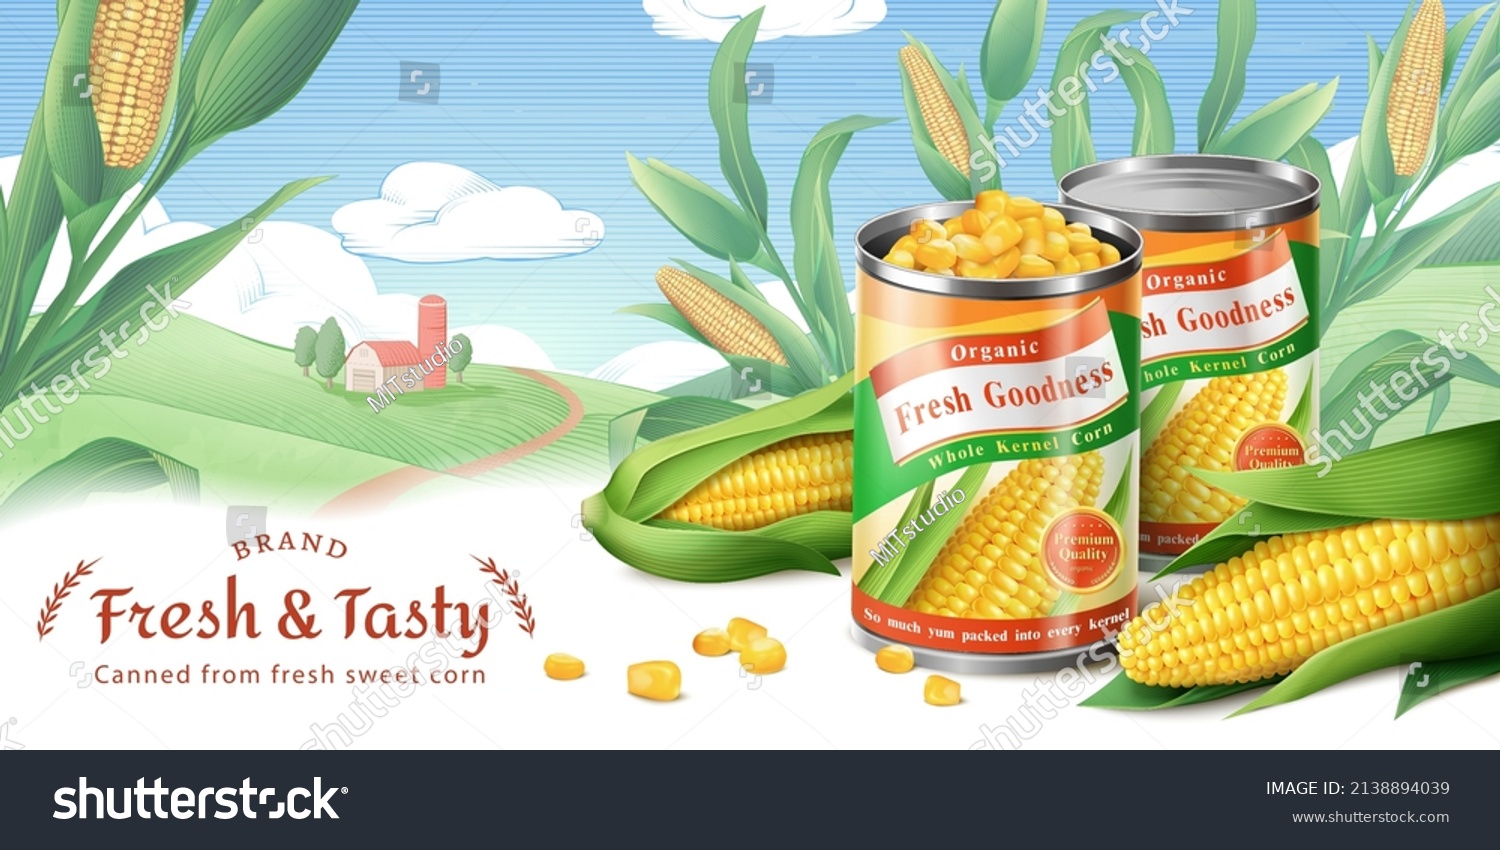 Natural and organic whole kernel corn can ad banner. 3d can package mockups and corn kernels on a engraving farm field drawing. #2138894039